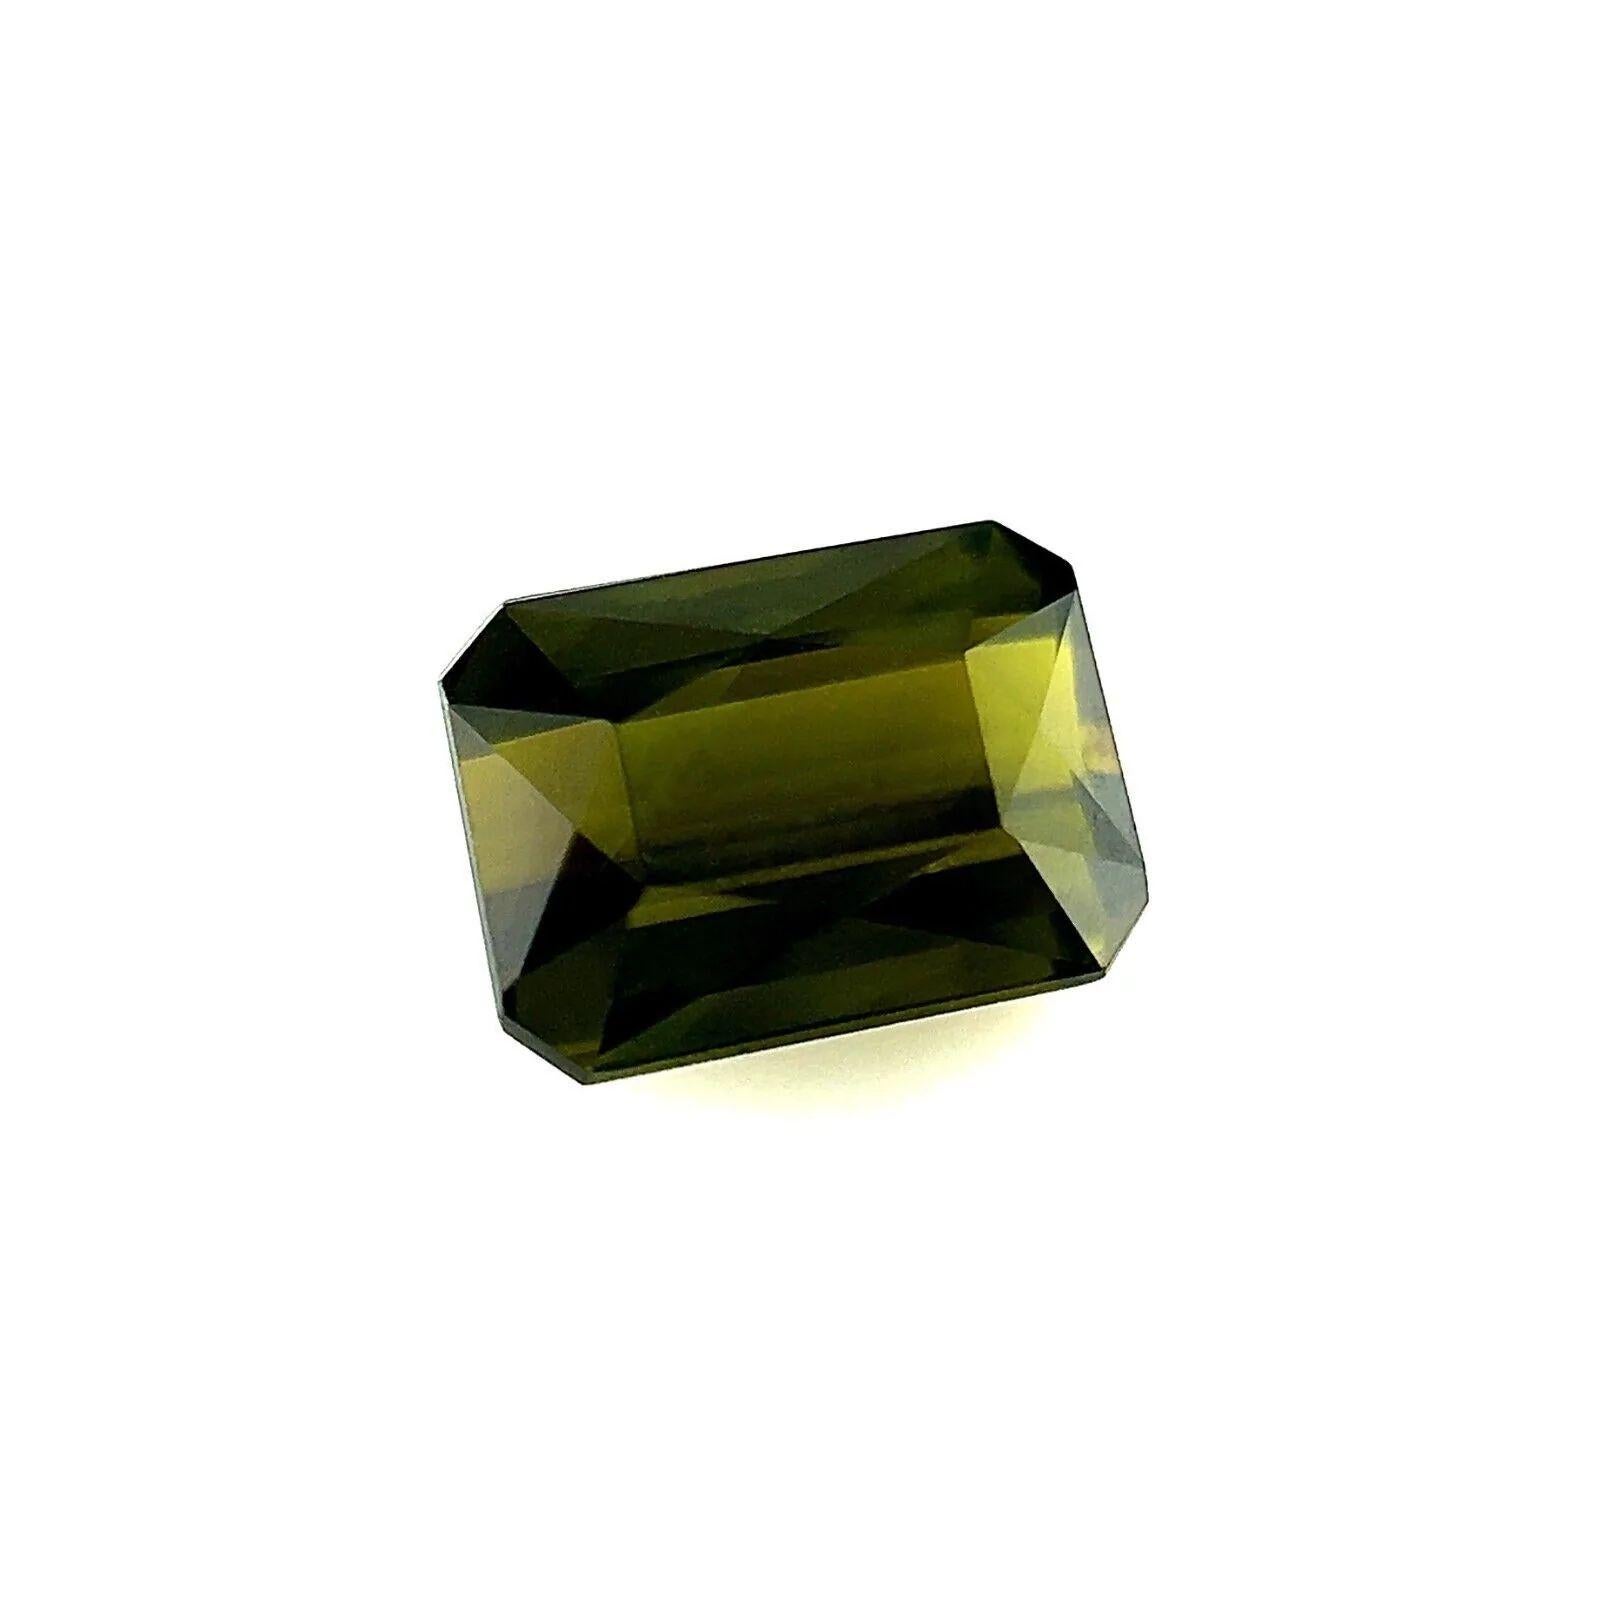 2.02ct Vivid Olive Green Tourmaline Fancy Octagon Emerald Loose Cut Gem 8.2x6mm

Natural Olive Green Tourmaline Gemstone.
2.02 Carat with a beautiful olive green colour and very good clarity, VS.
Some small natural inclusions visible when looking